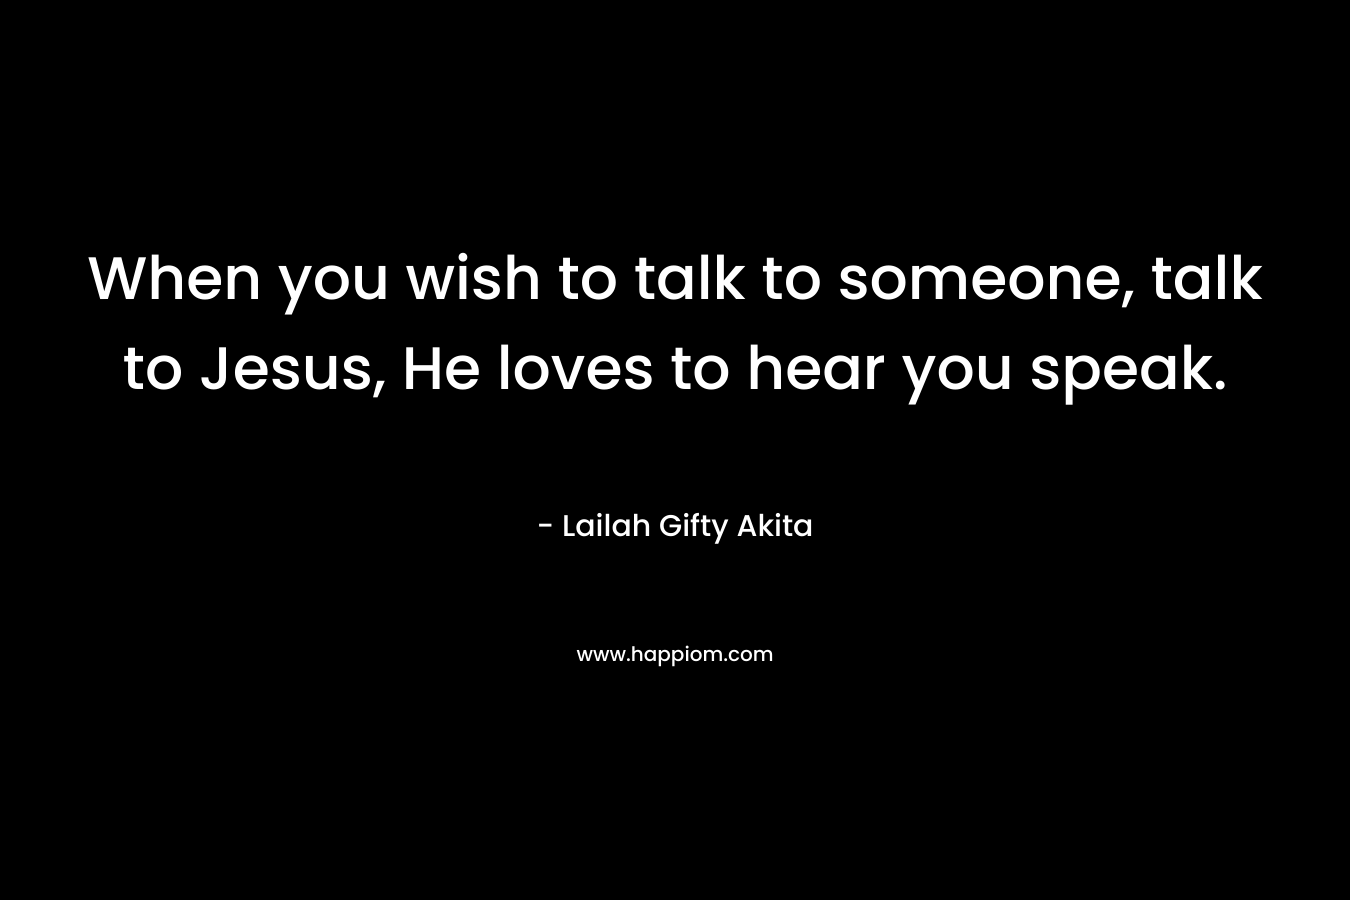 When you wish to talk to someone, talk to Jesus, He loves to hear you speak.